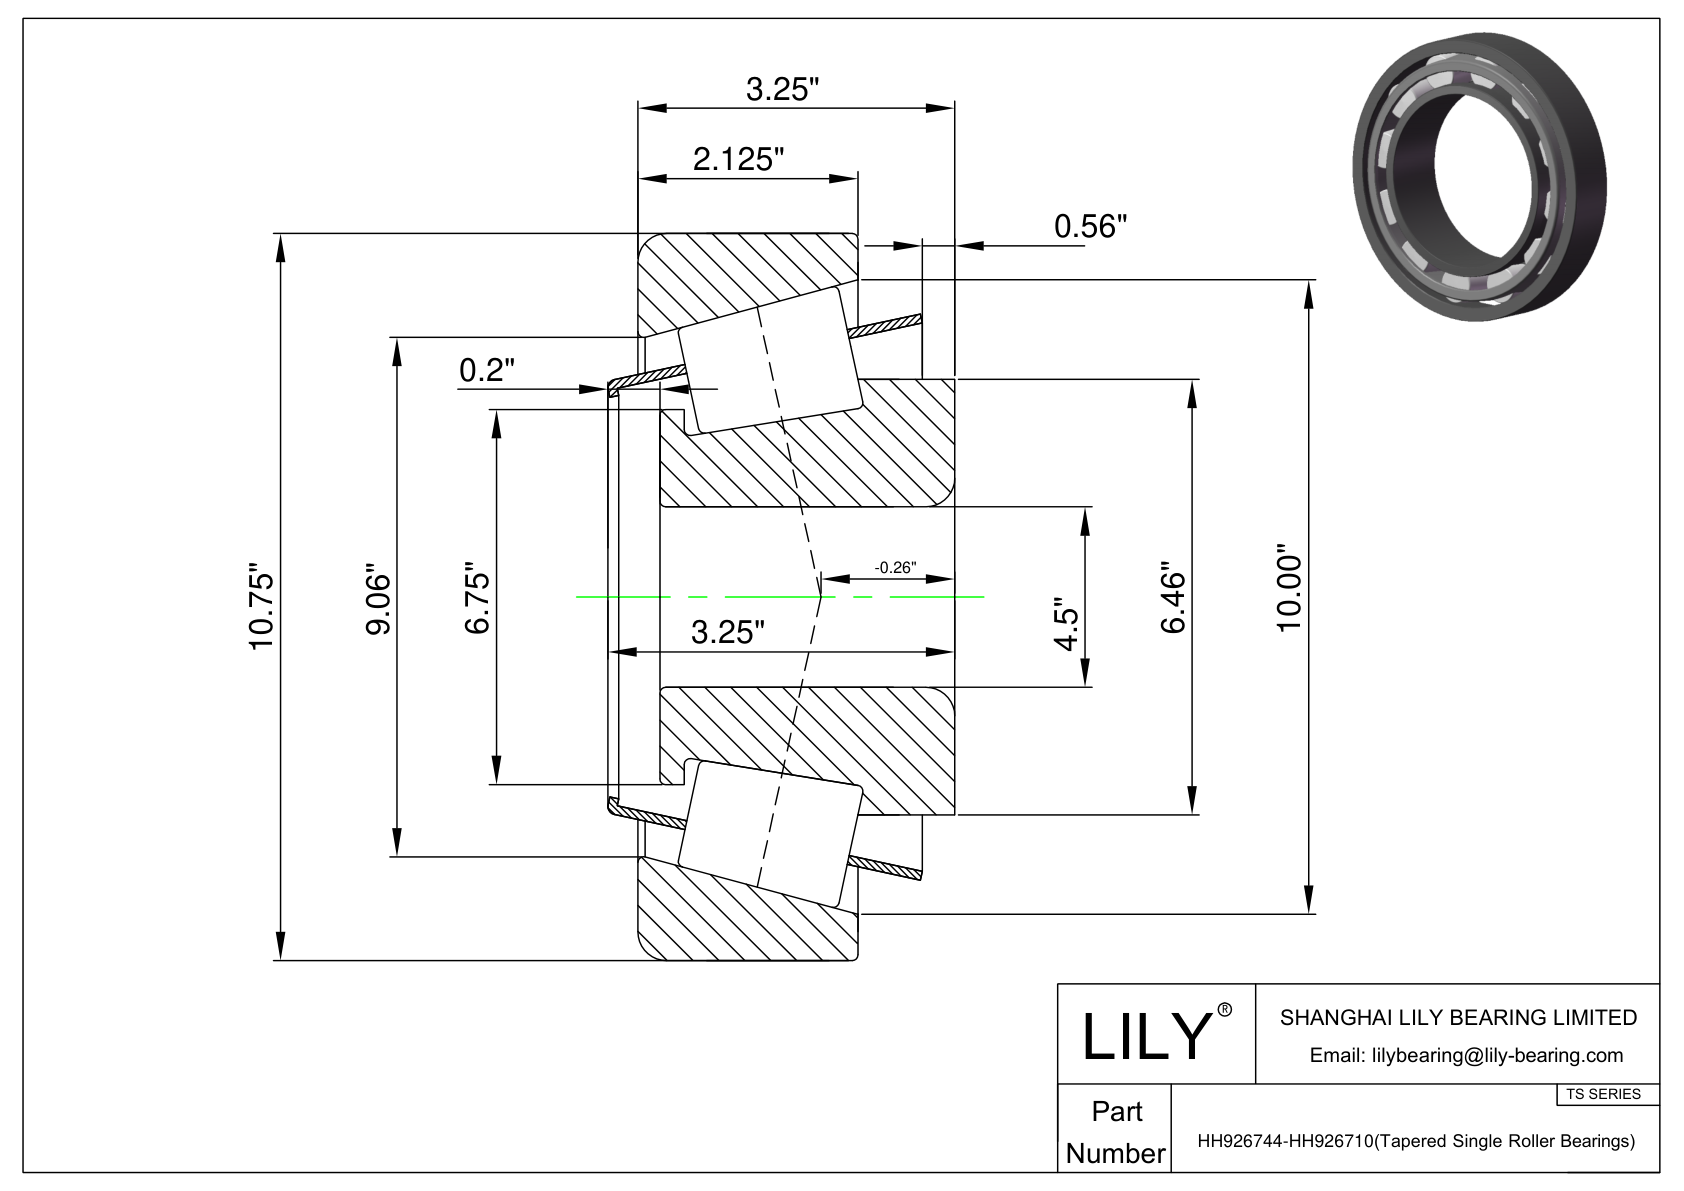 HH926744-HH926710 TS (Tapered Single Roller Bearings) (Imperial) cad drawing